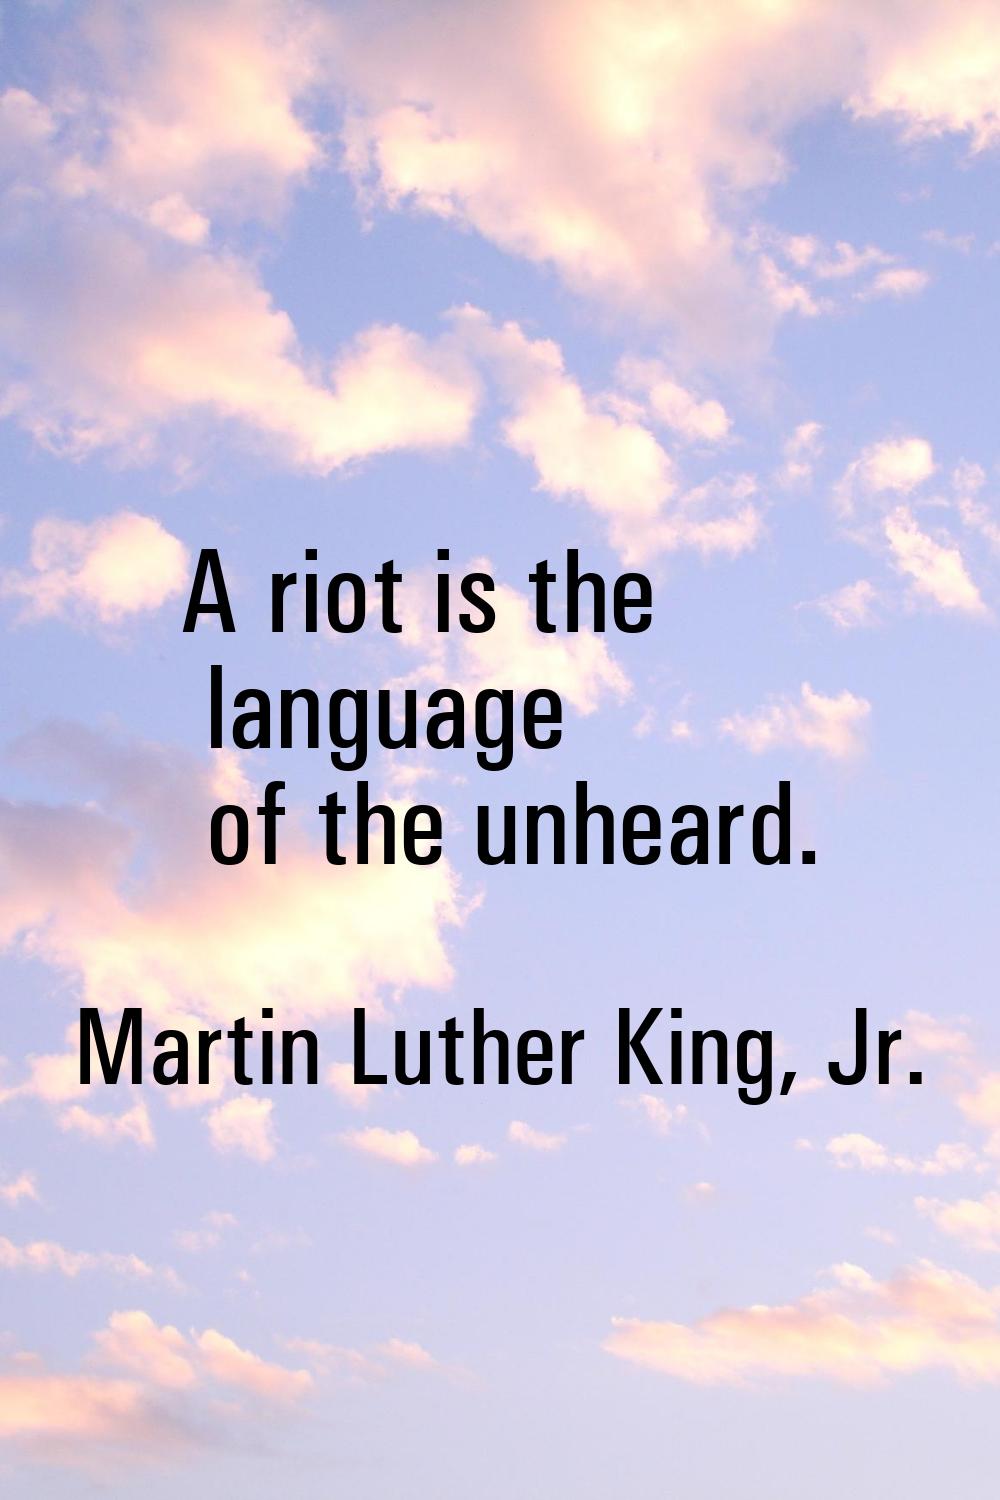 A riot is the language of the unheard.